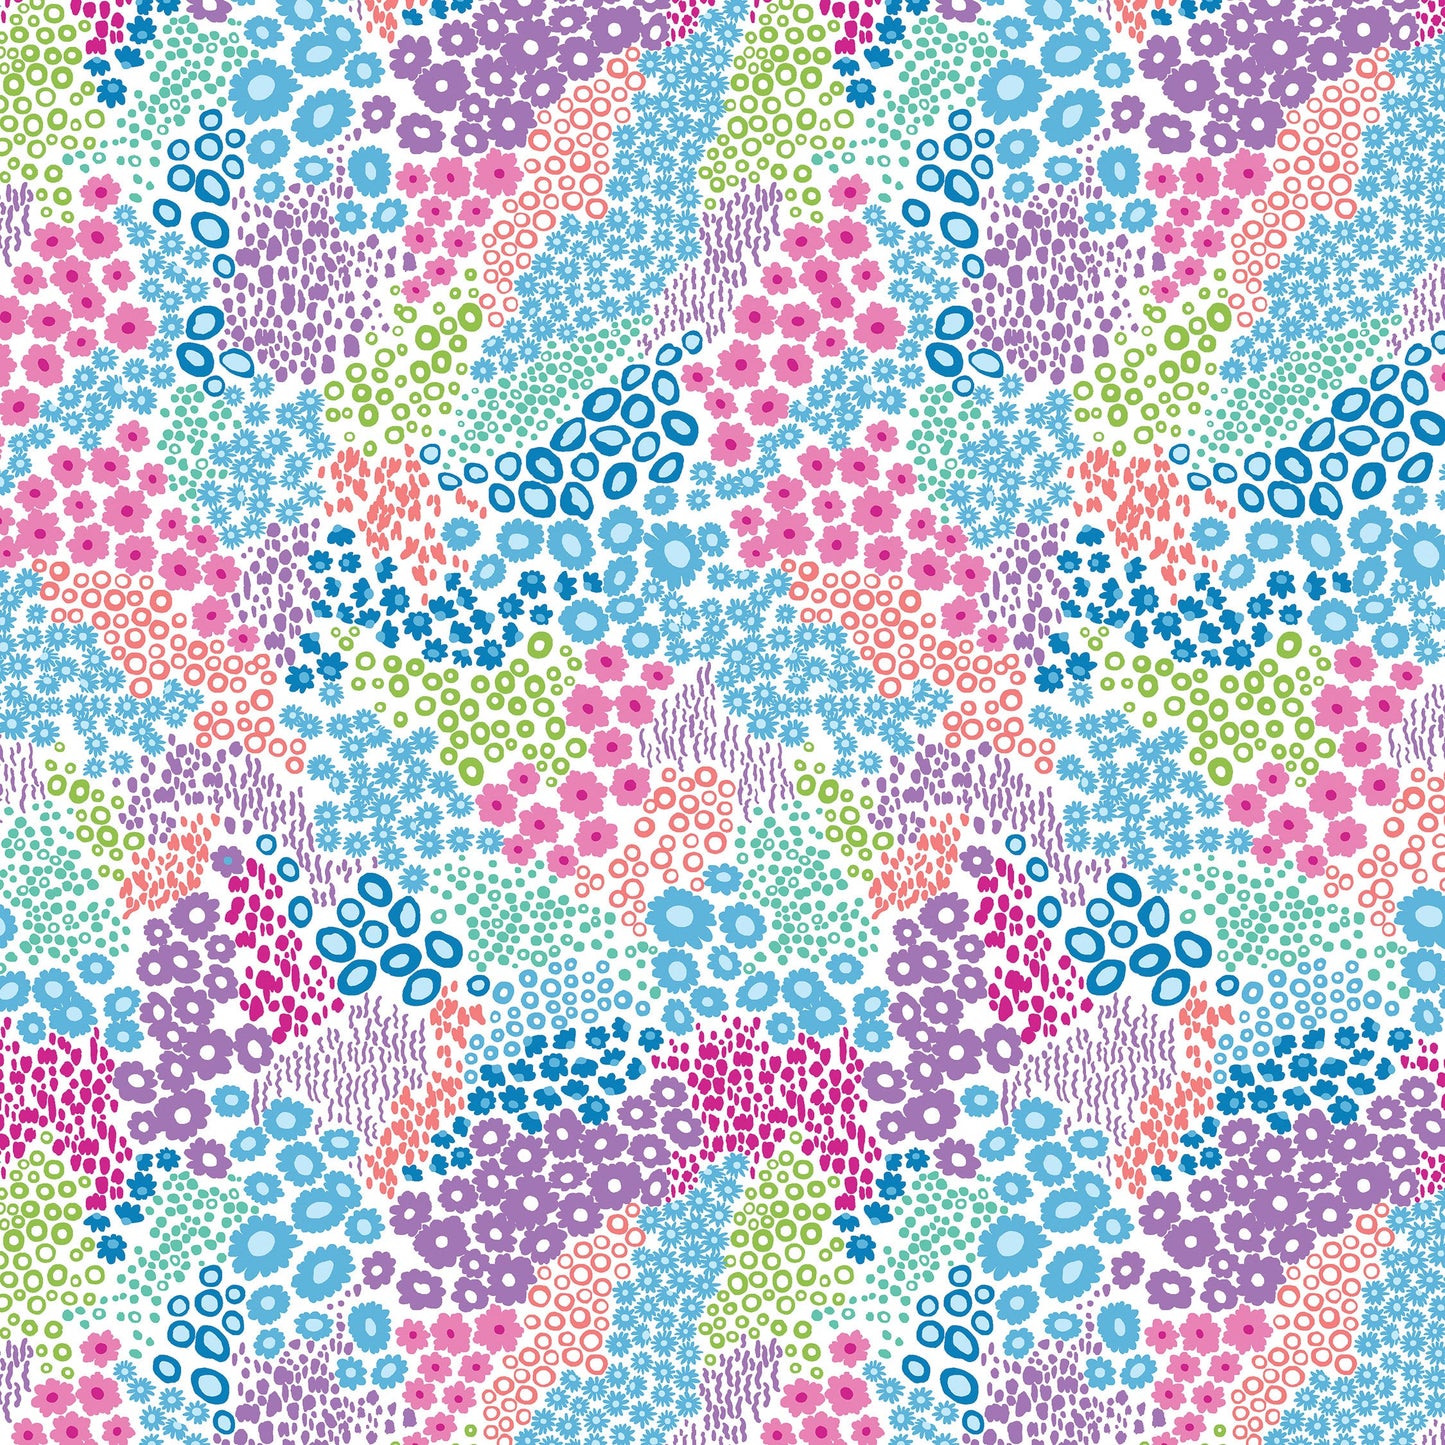 Field Flowers on White (13279-90) is from the Blooming Denim collection by Cherry Guidry for Benartex. The fabric features a cheerful collection of tiny flowers in waves of hot pinks, lime greens, teals, and violets. 